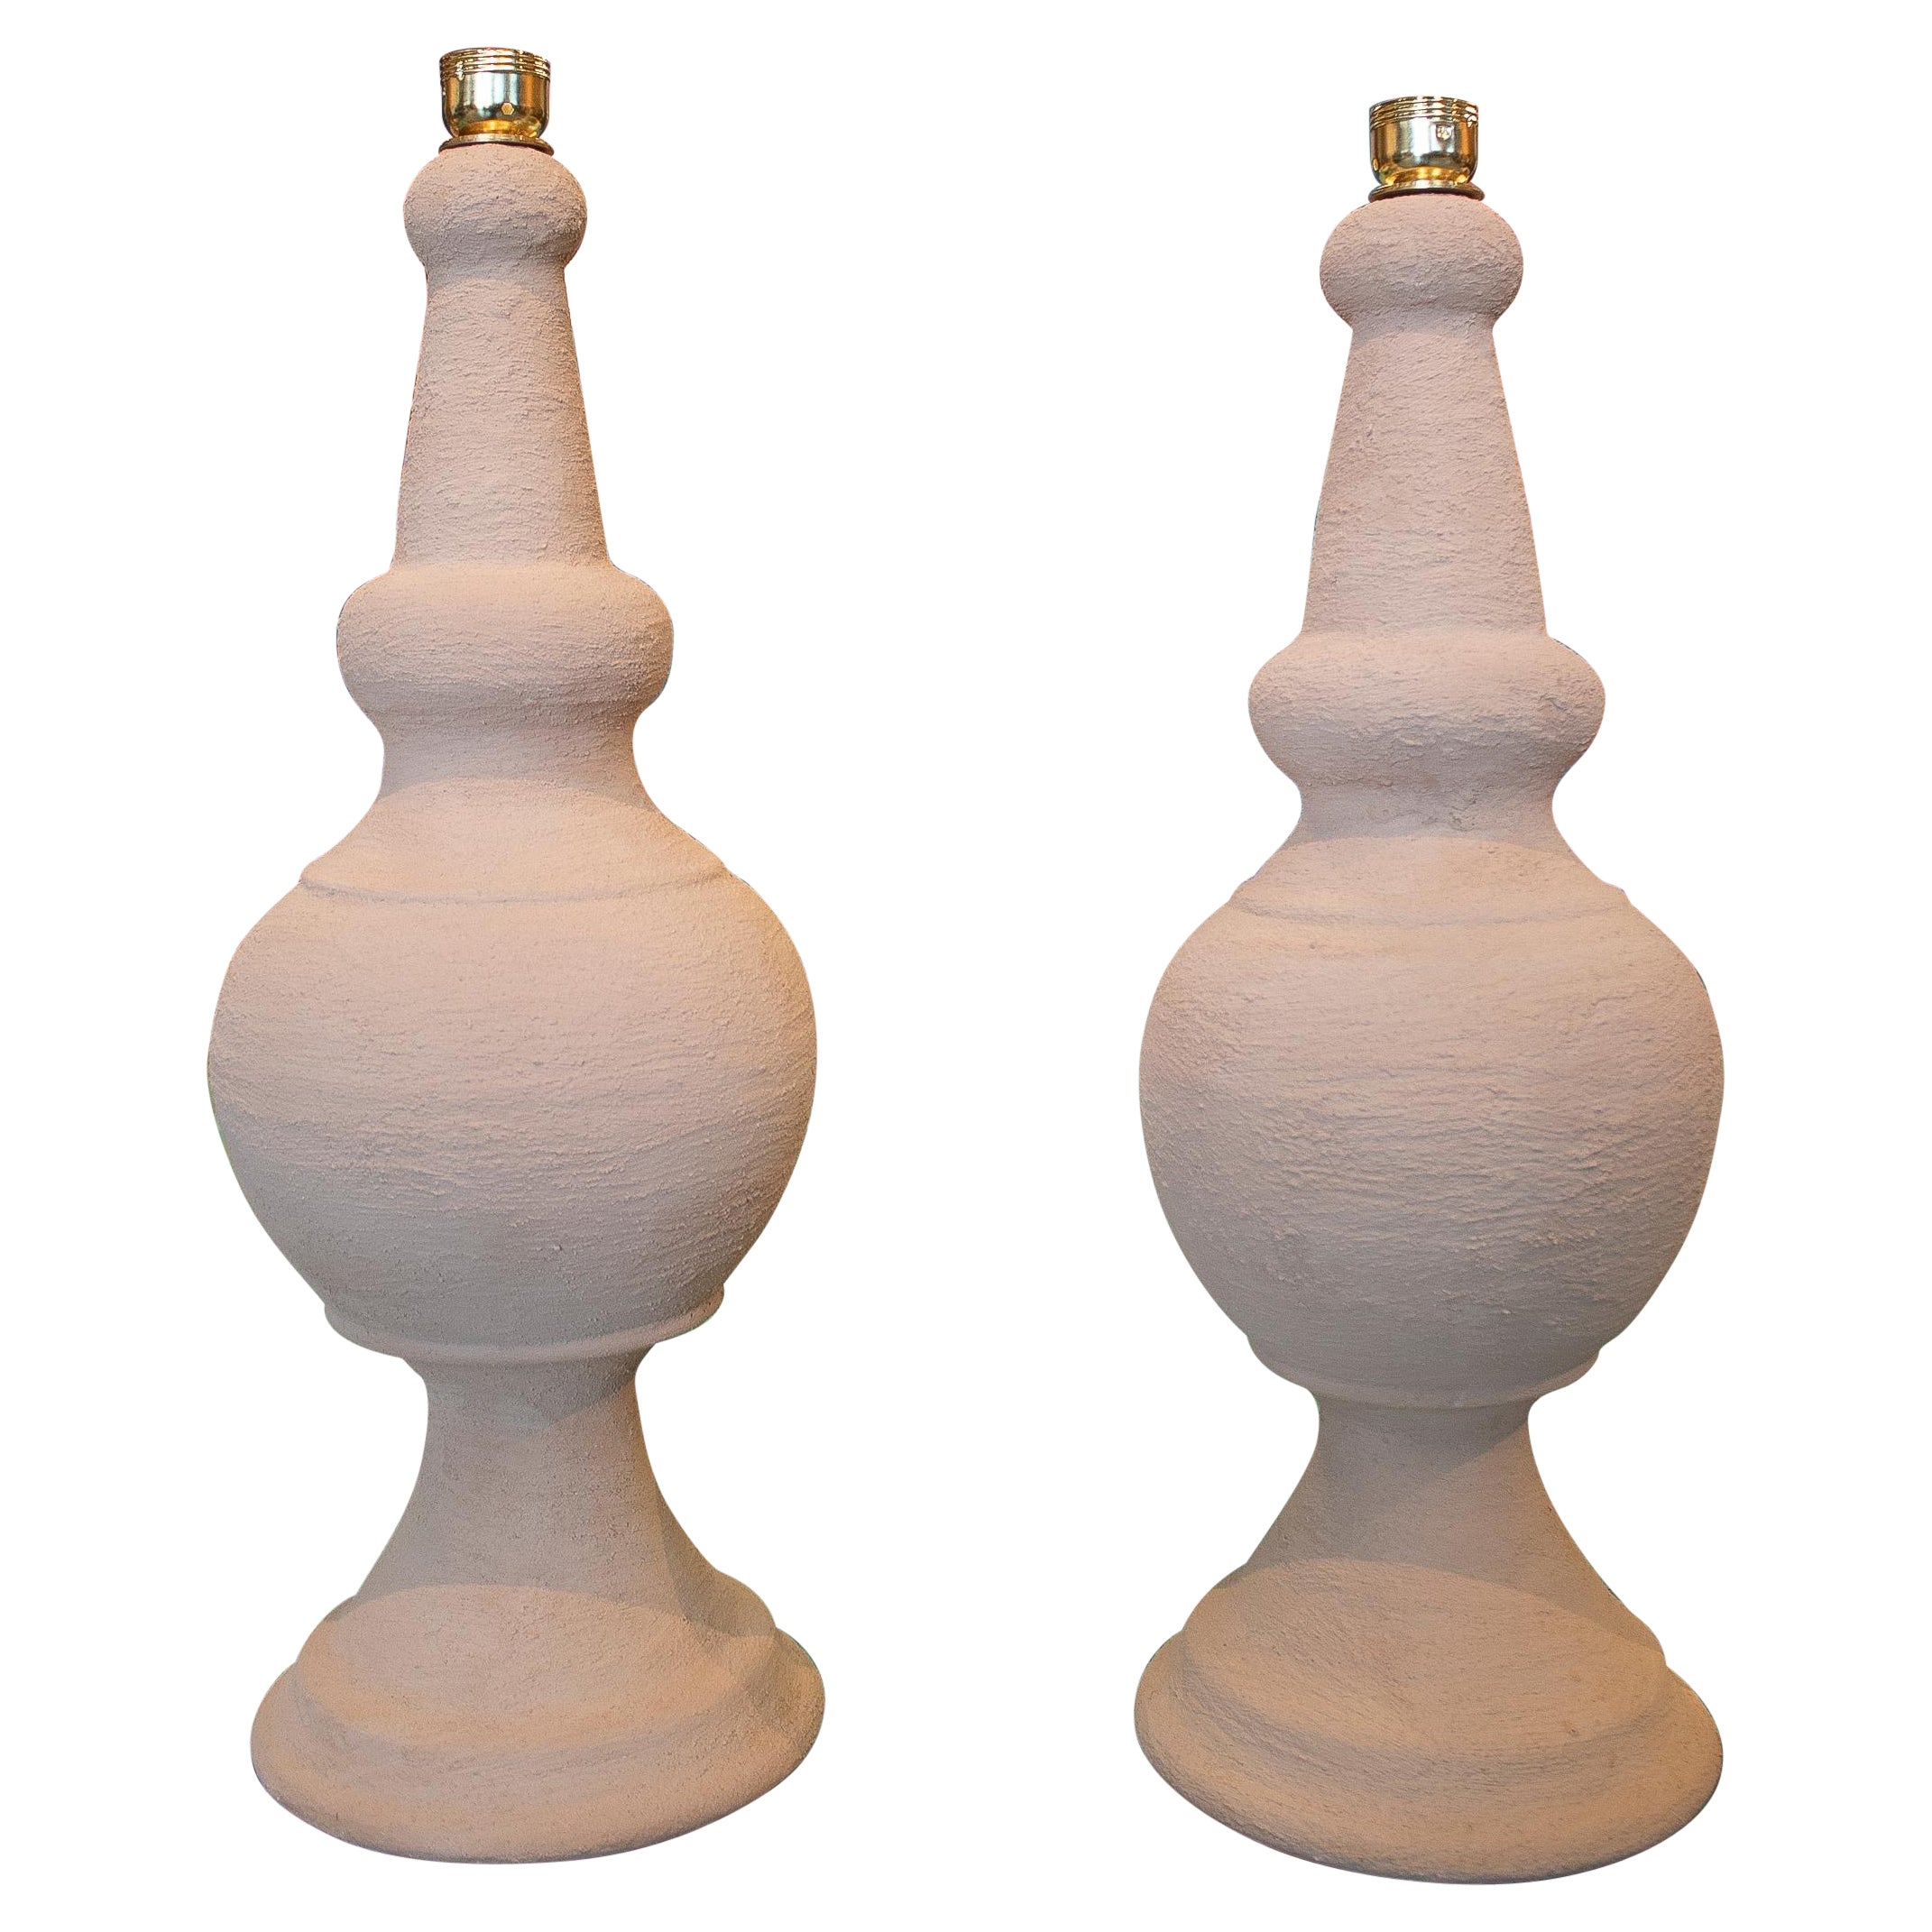 Pair of 1980s Spanish Handcrafted White Ceramic Table Lamps